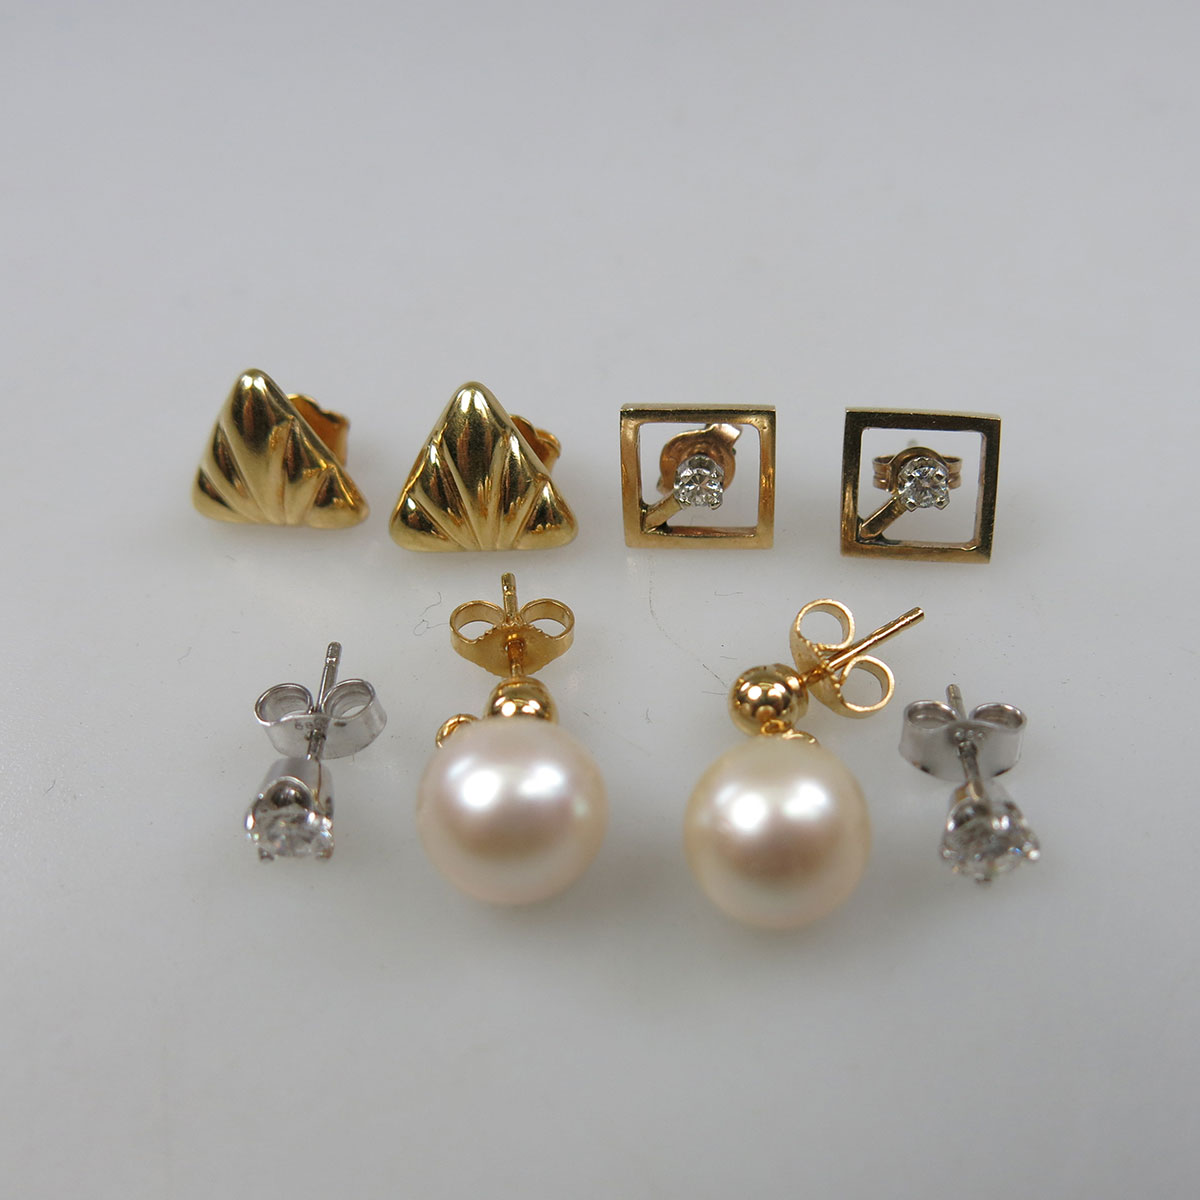 4 Pairs Of Gold Earrings